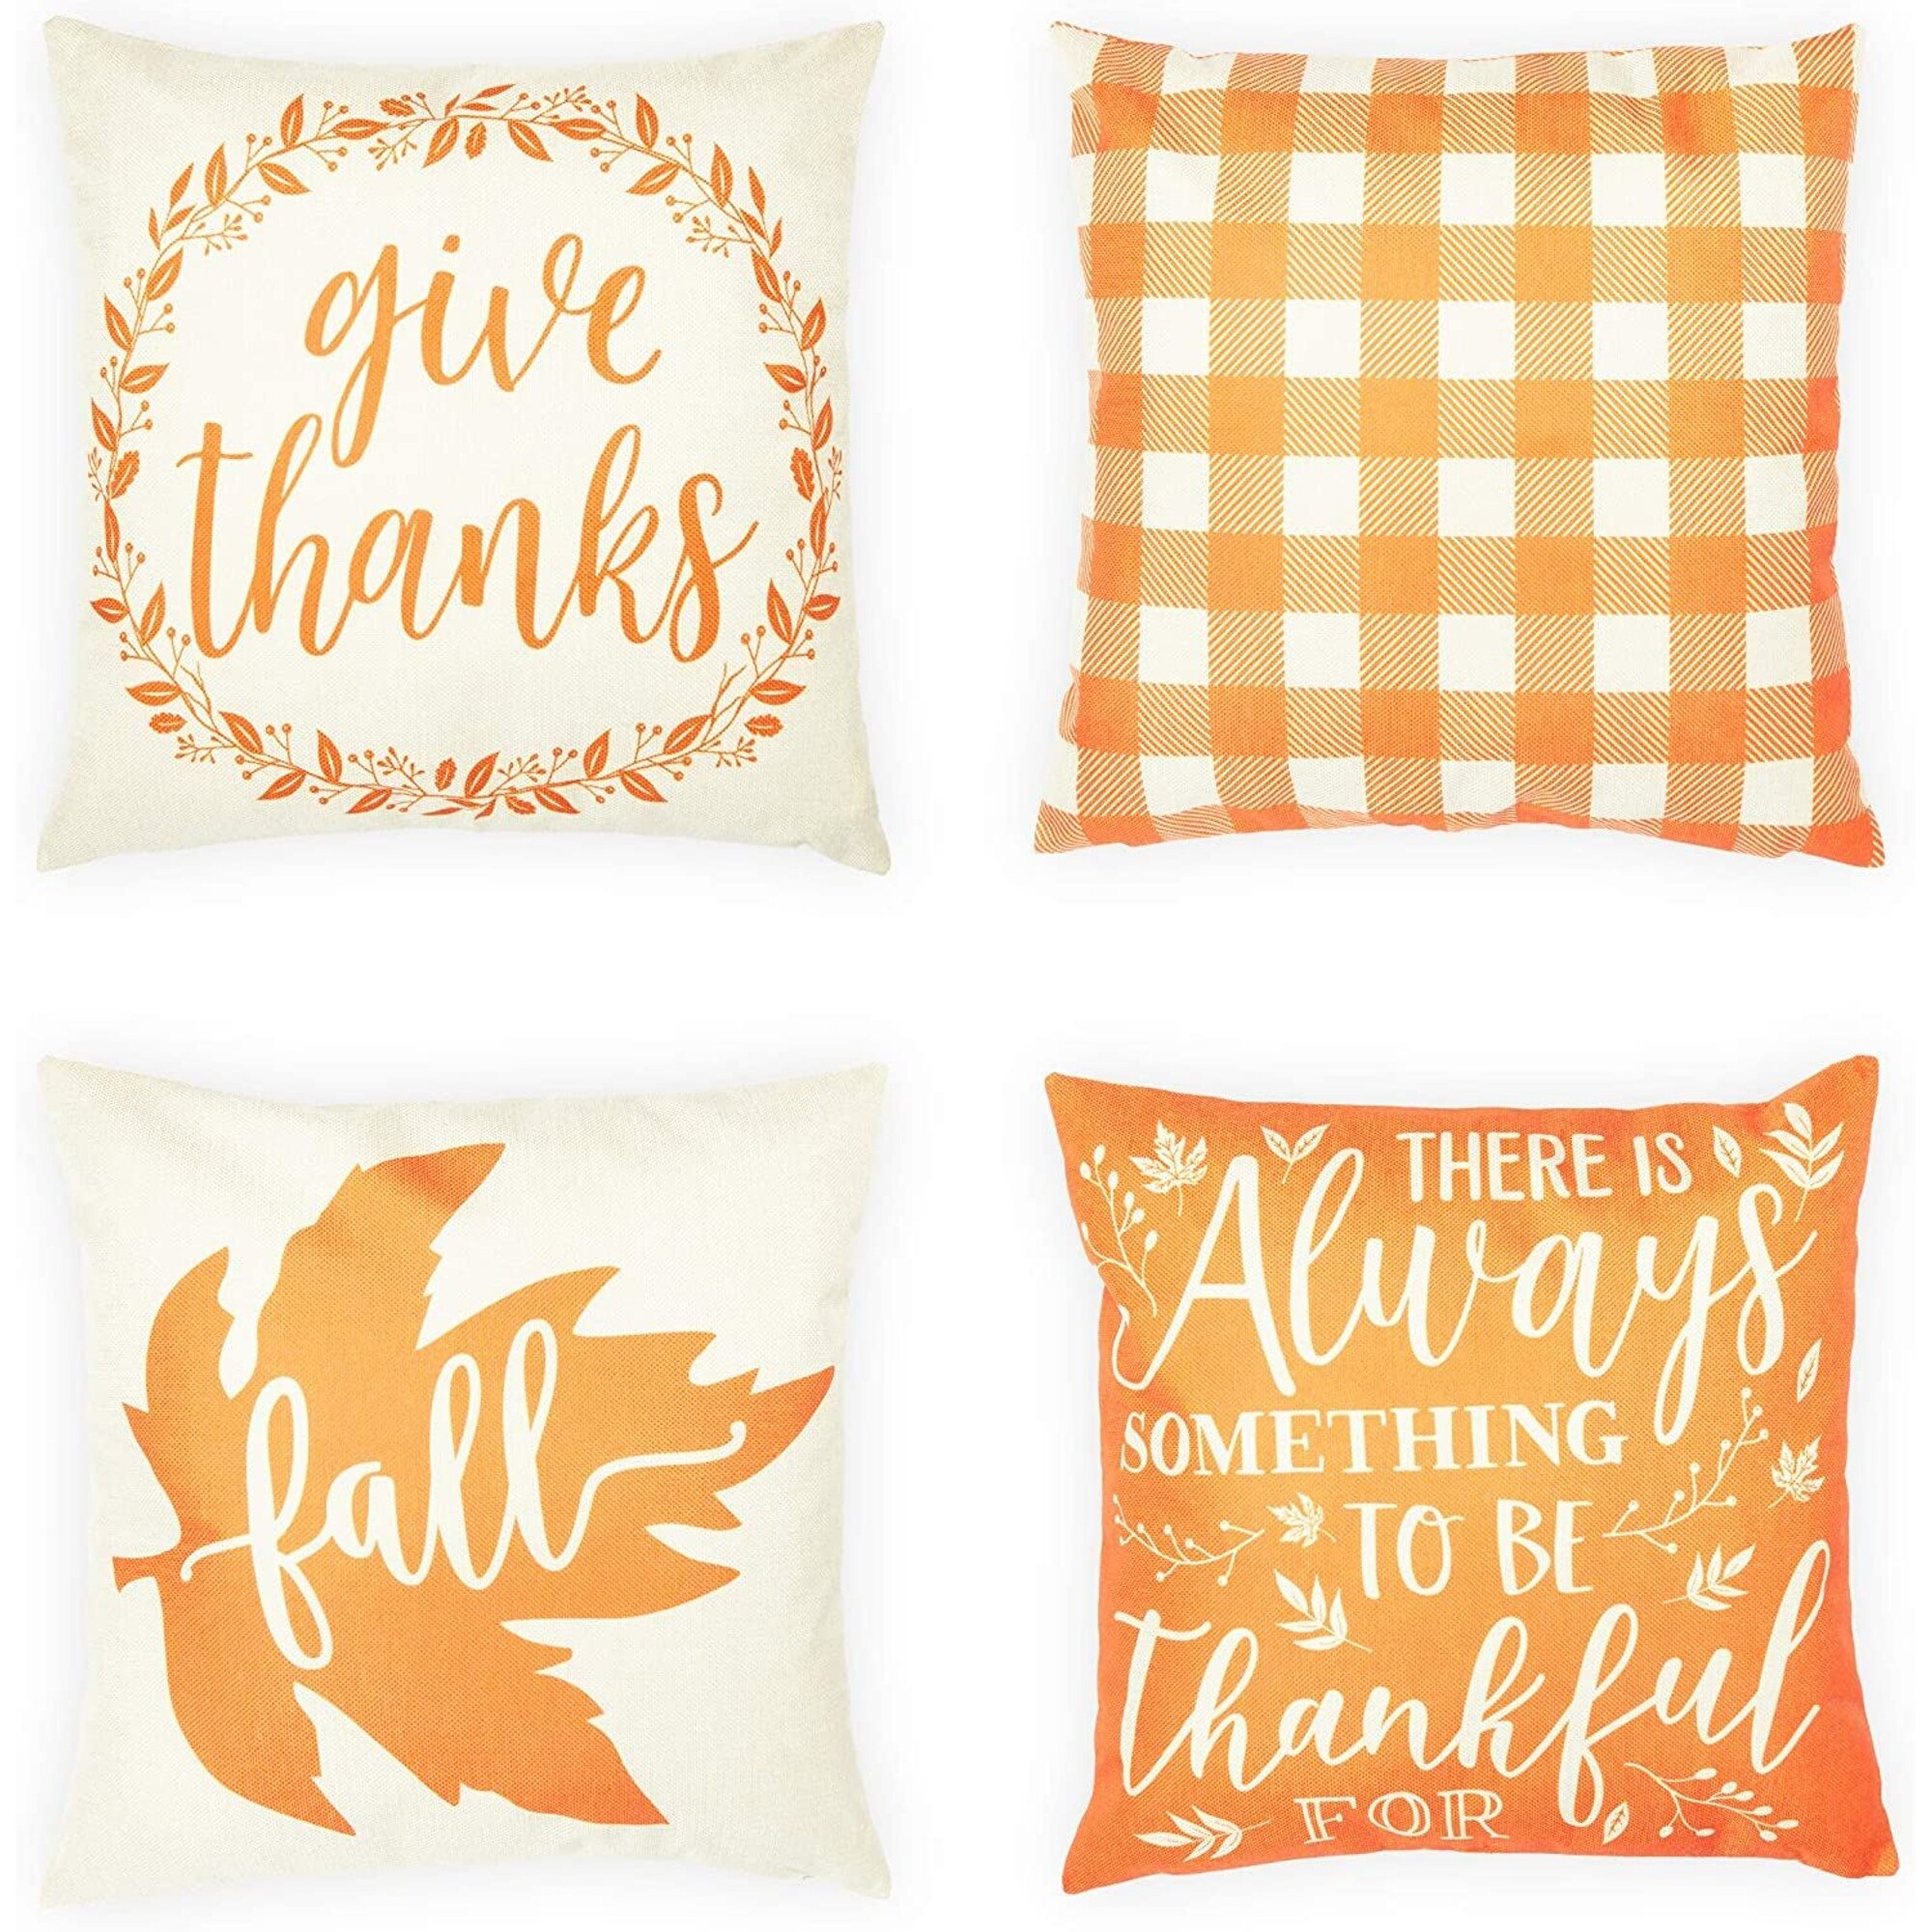 https://ak1.ostkcdn.com/images/products/is/images/direct/5269336242a5bacb7701007ec4458090cc8c1f2d/Okuna-Outpost-Fall-Thanksgiving-Throw-Pillow-Covers-%2818-x-18-in%2C-4-Designs%2C-4-Pack%29.jpg